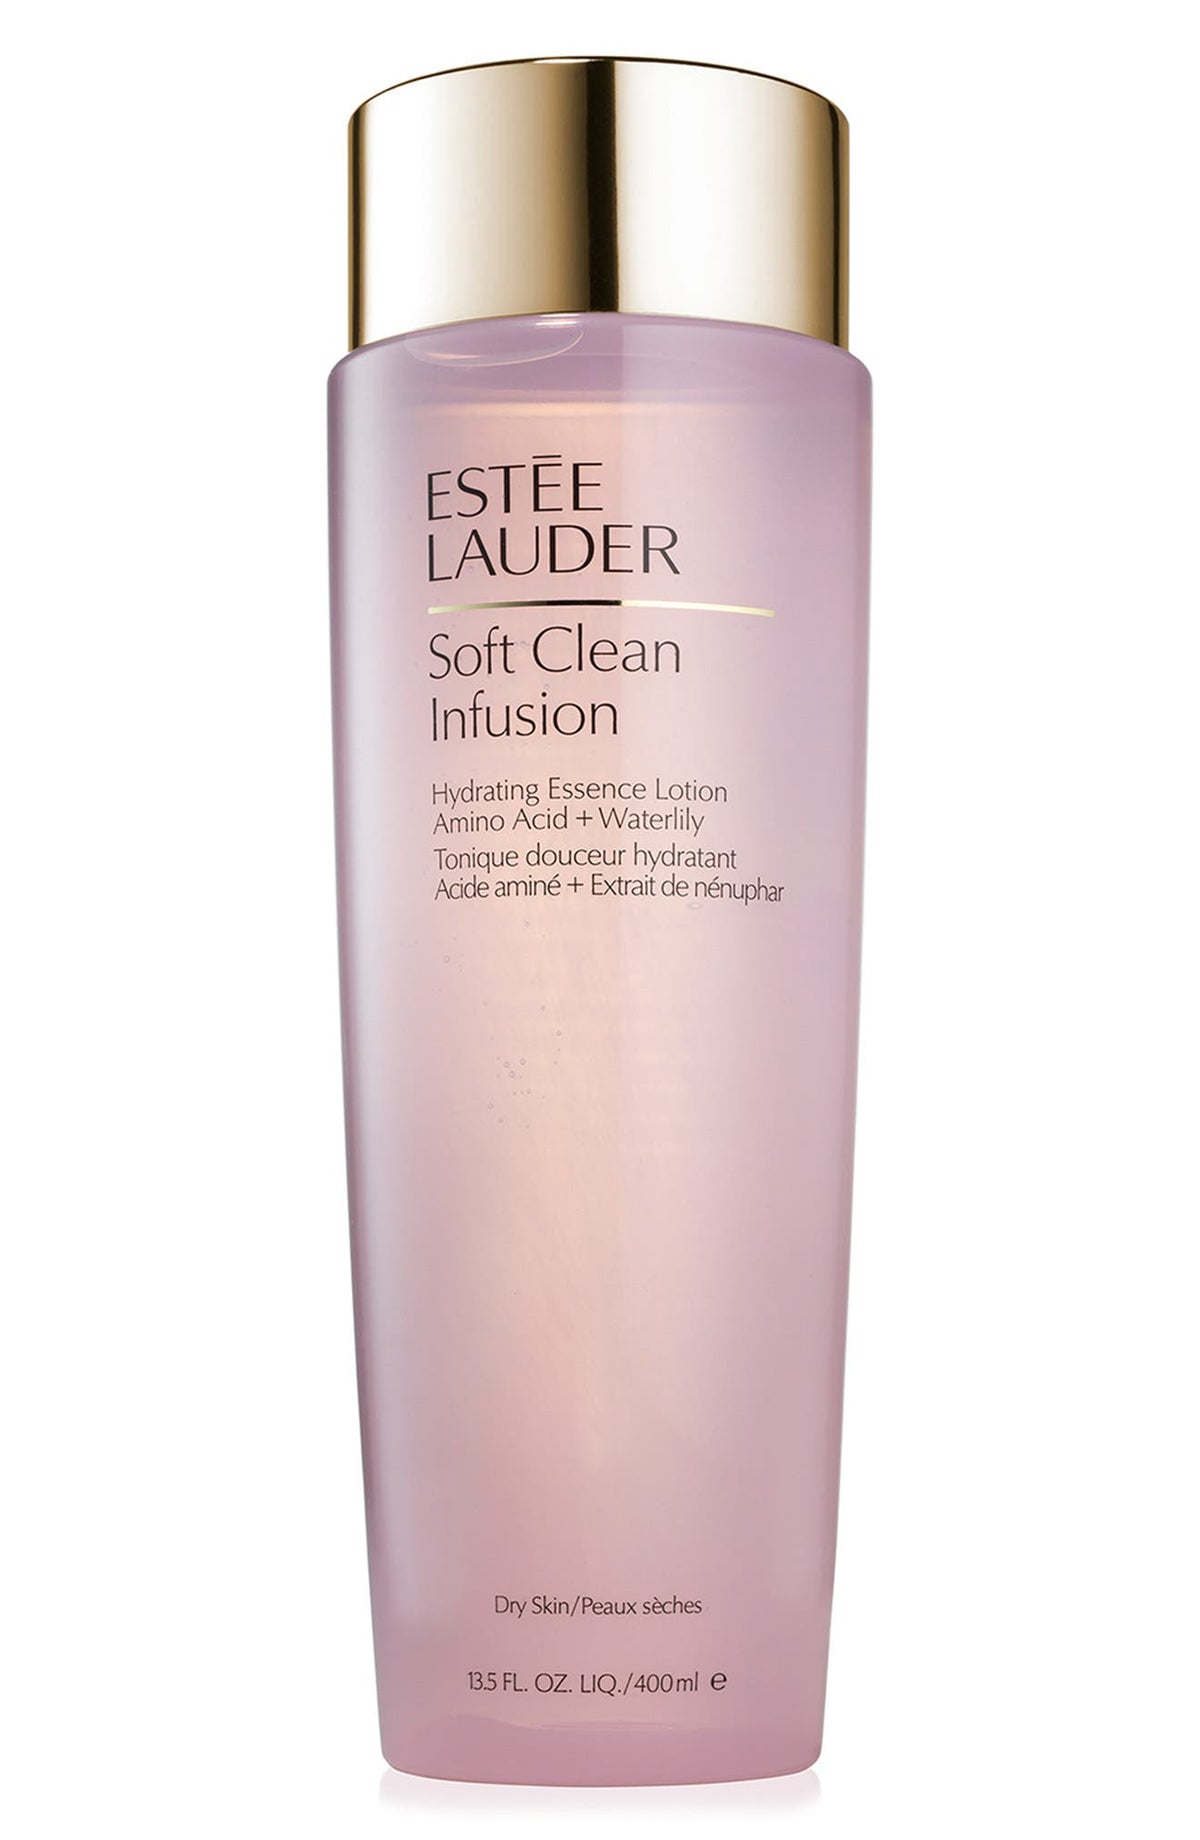 Estee Lauder Soft Clean Infusion Hydrating Essence Treatment Lotion